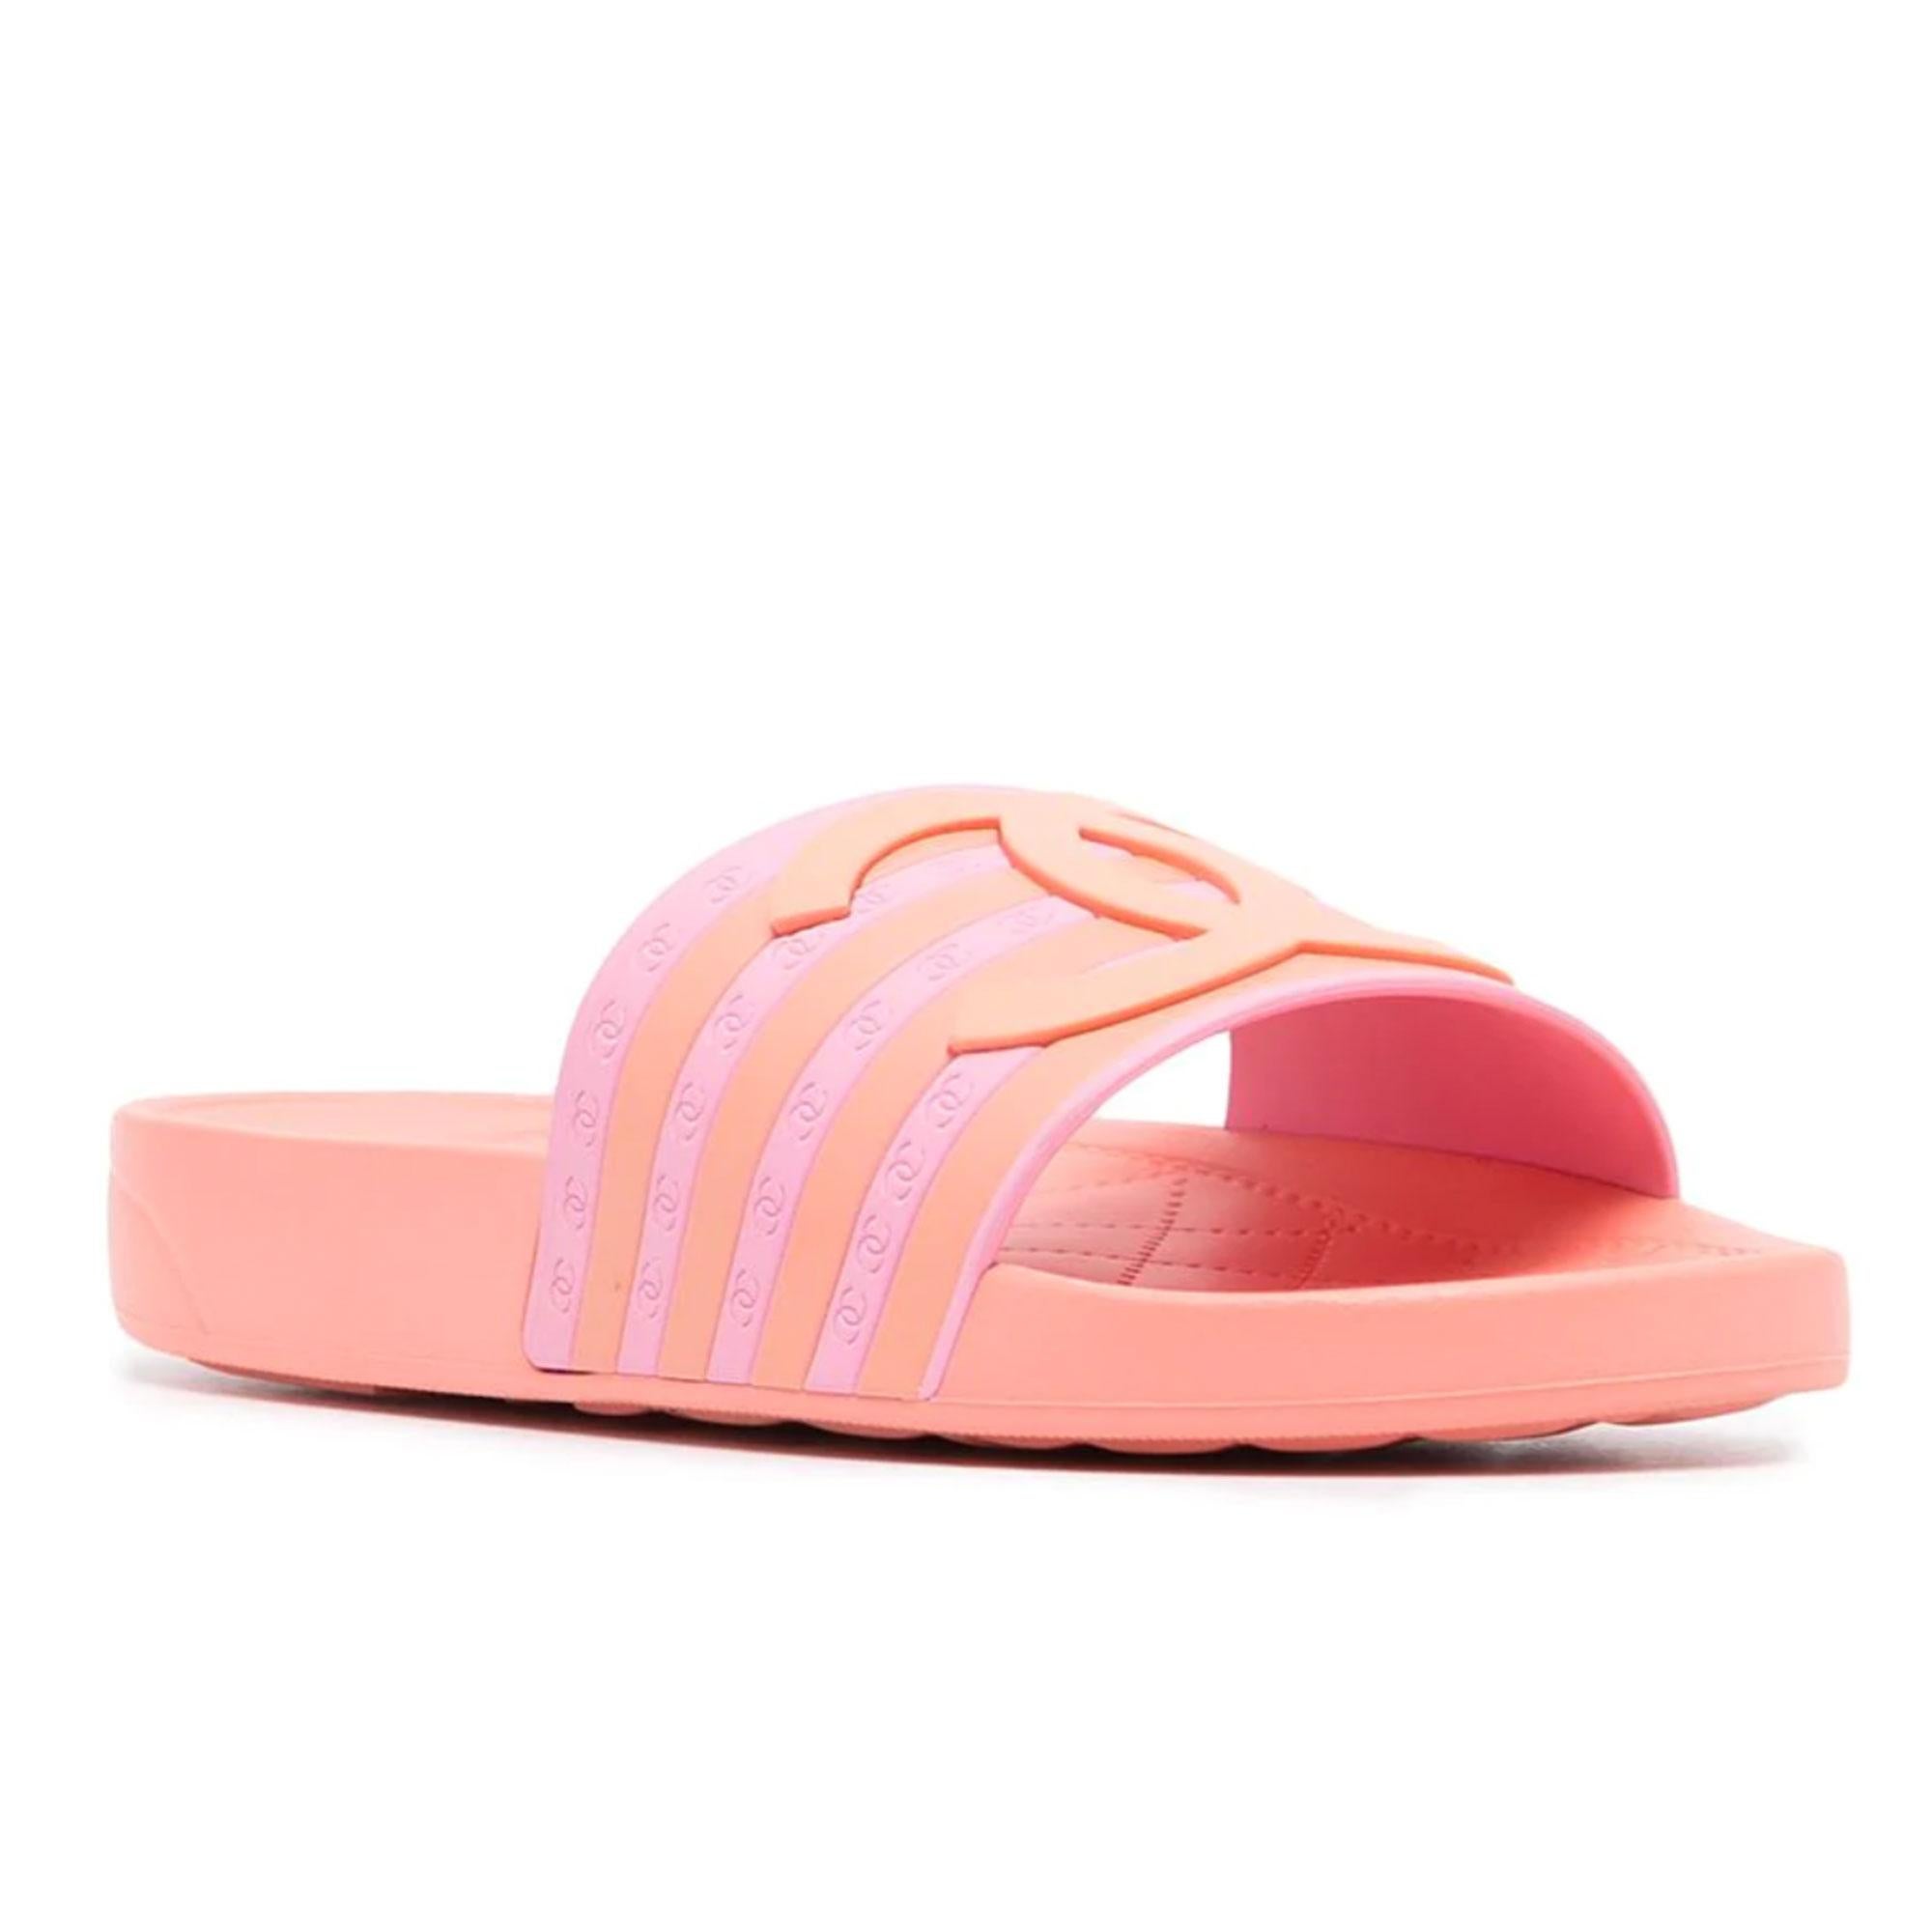 Chanel 2018 Cruise Resort Pink Peach Orange Rubber Sandals Slides 41 New in Box In New Condition For Sale In Miami, FL